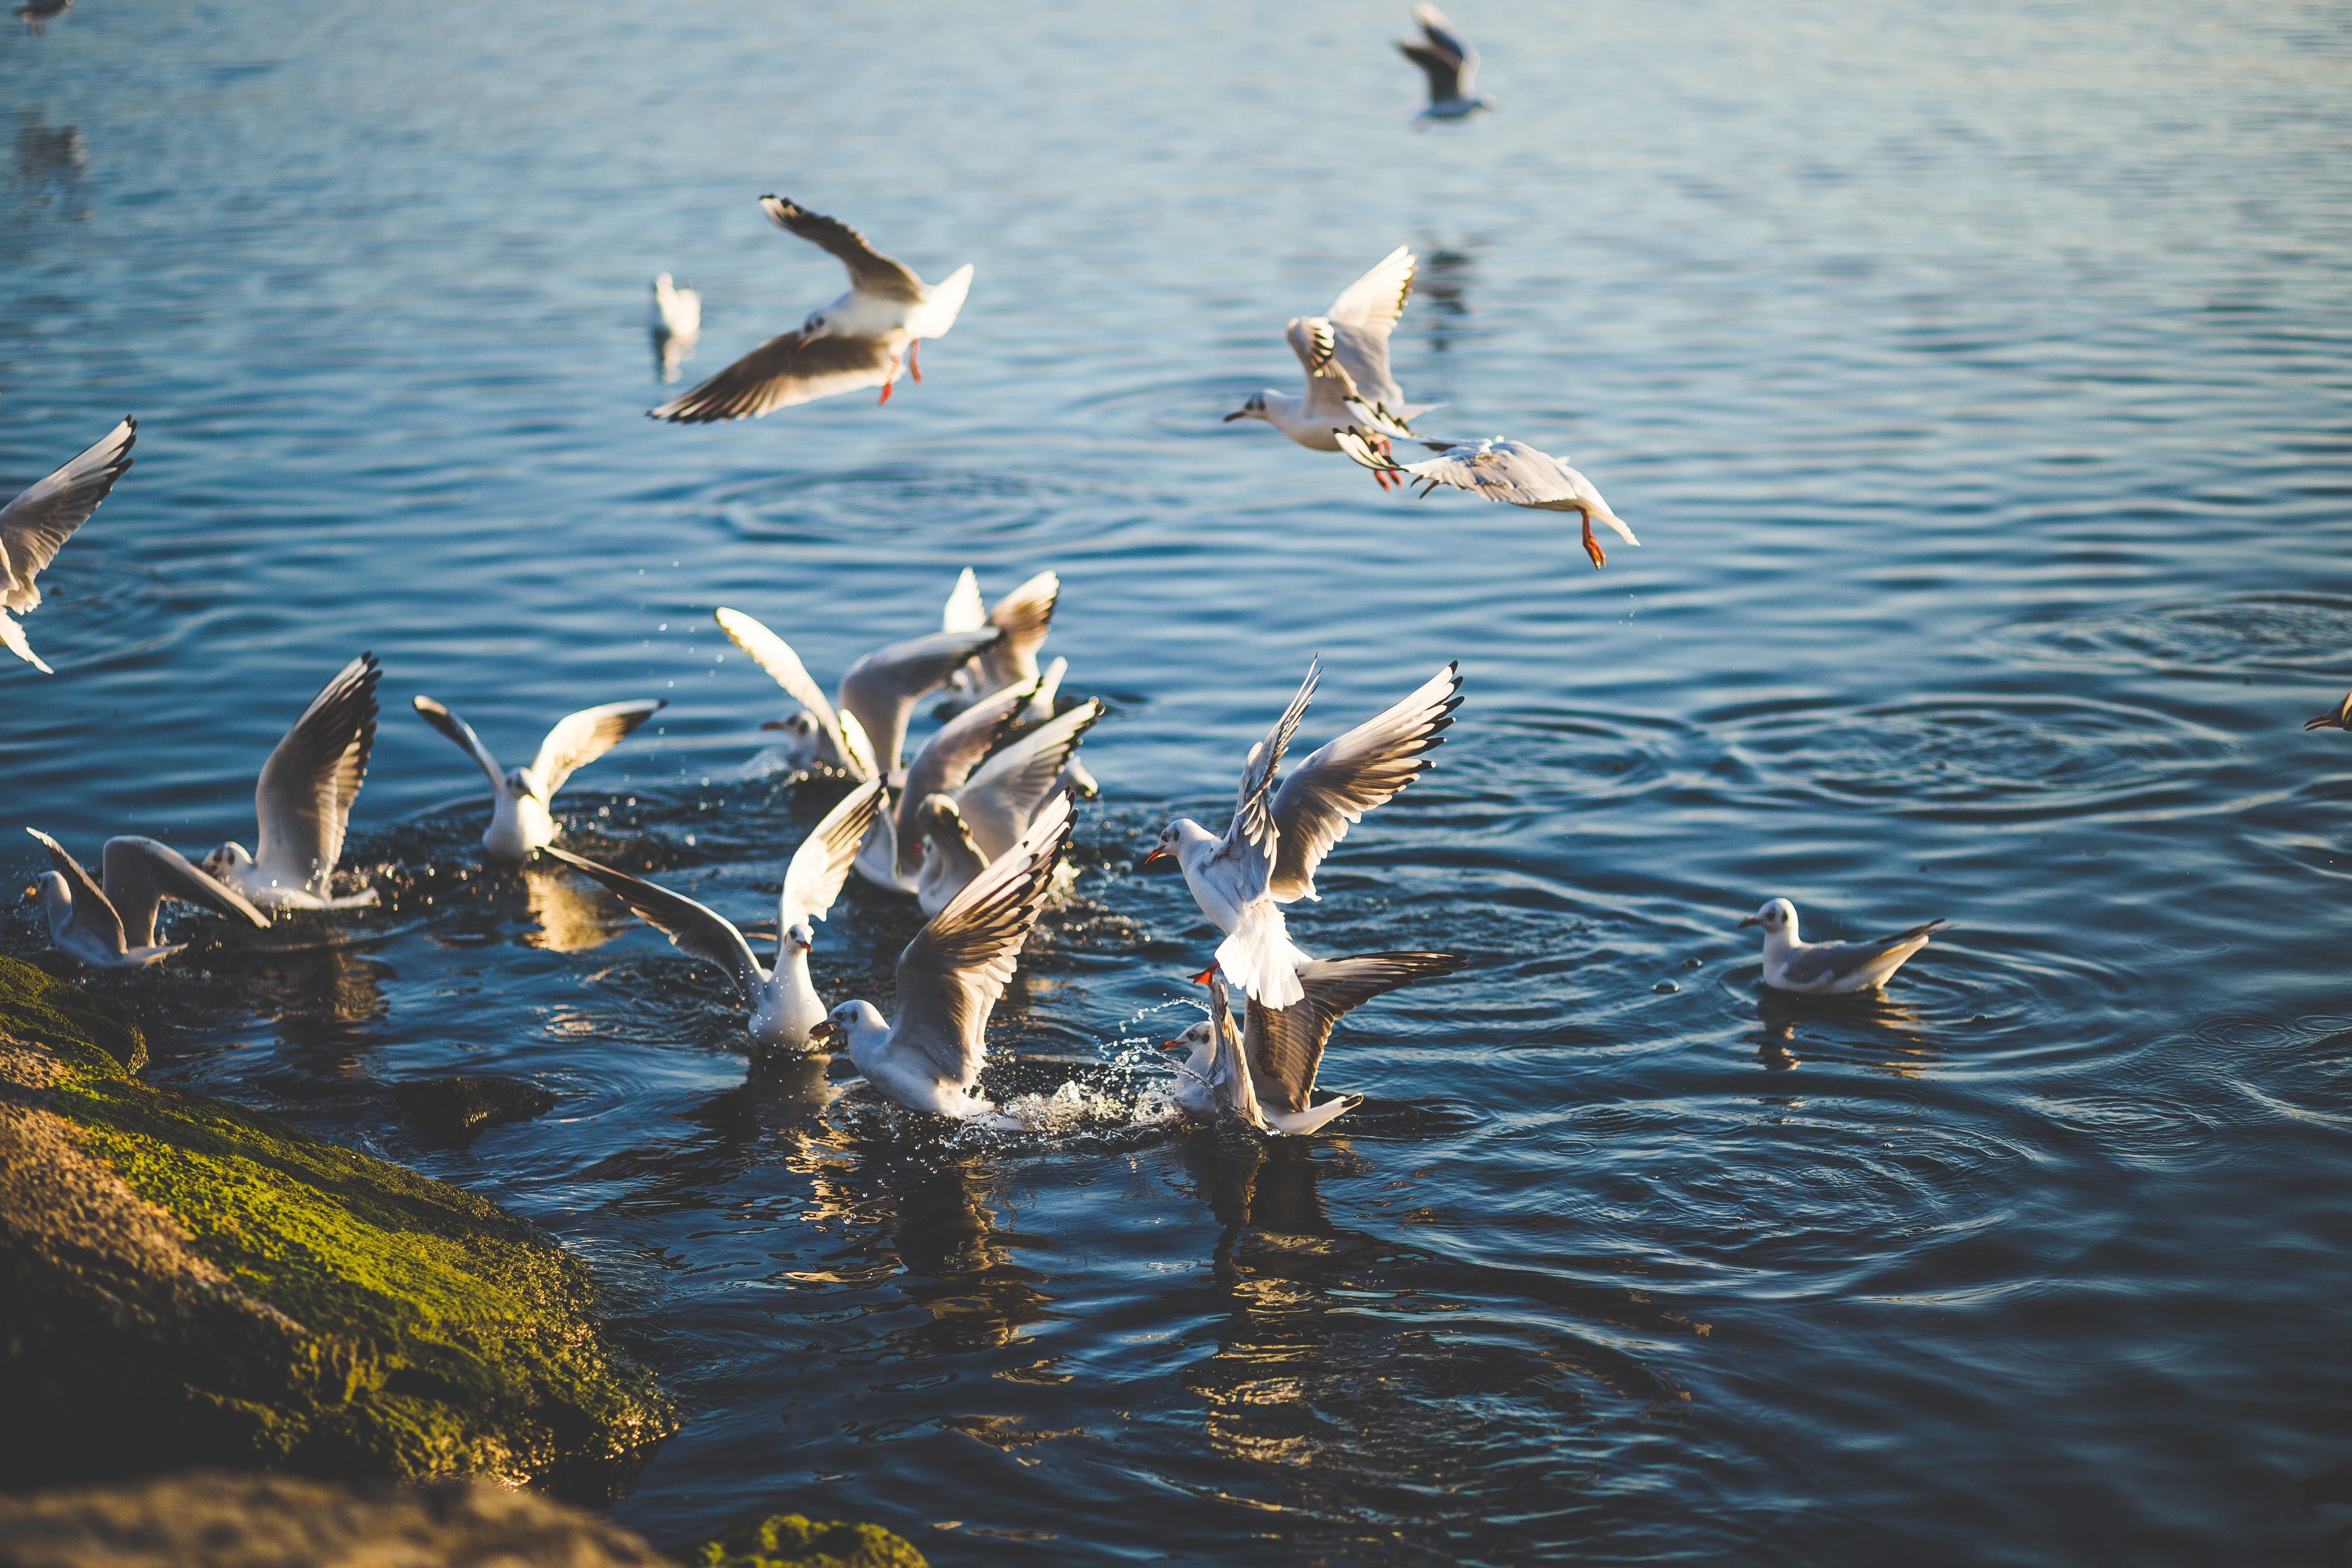 Flock of Birds Flying and Diving over Water during Daytime